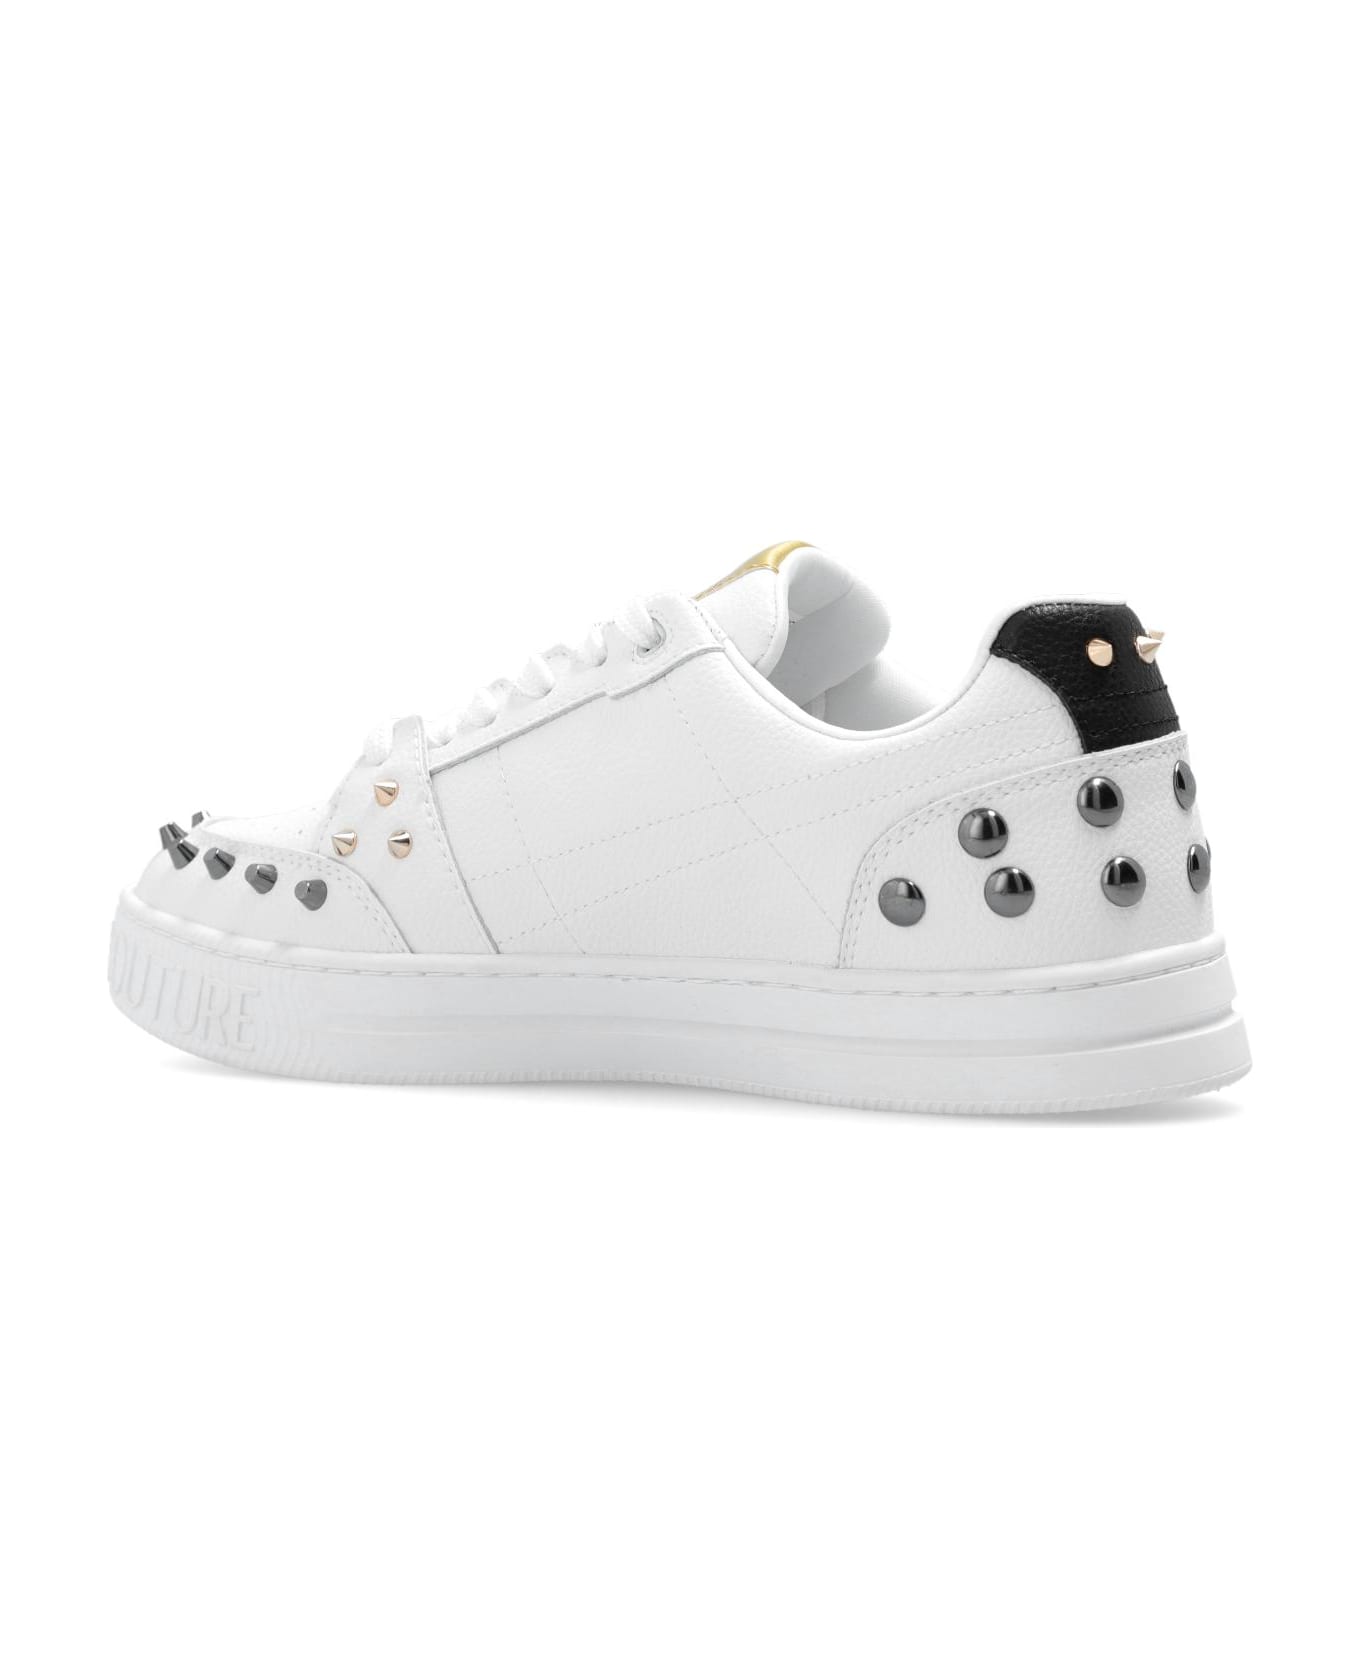 Versace Jeans Couture Stud-detailed Low-top Sneakers - WHITE/MULTI スニーカー